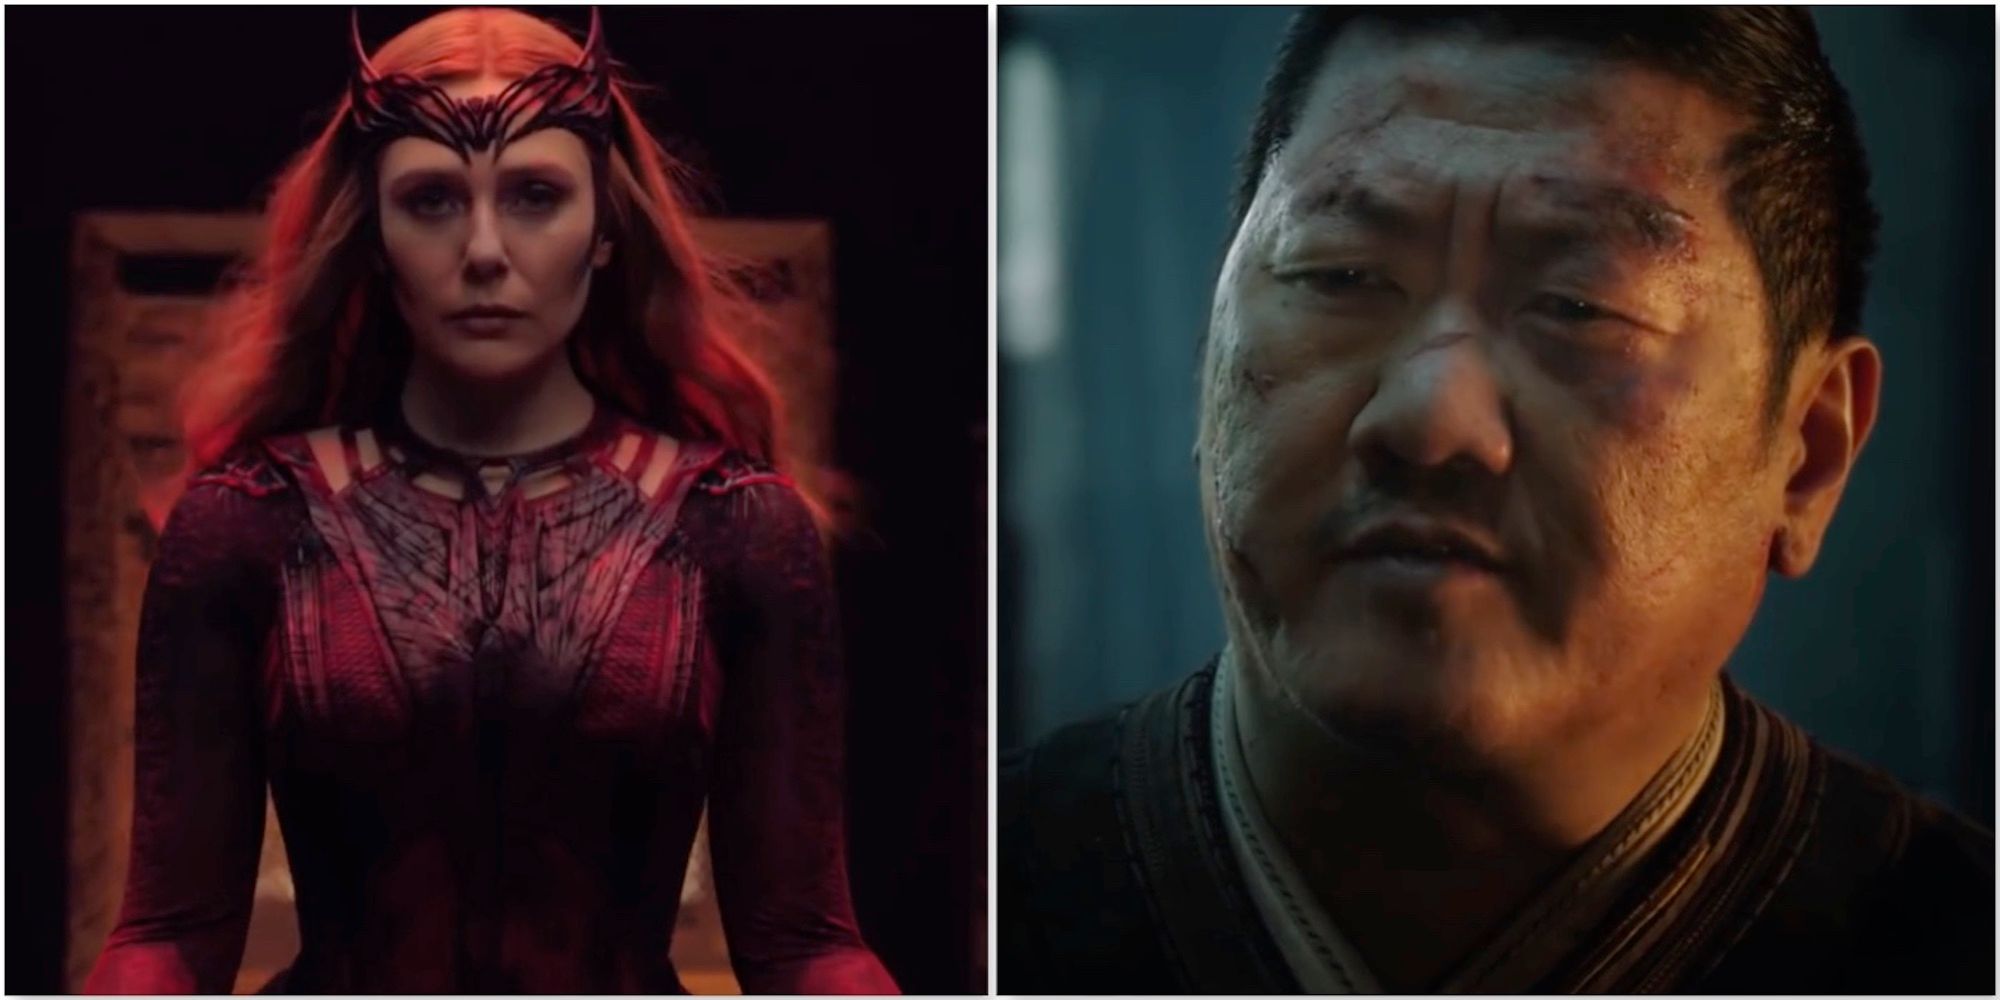 Wanda and Wong from Doctor Strange in the Multiverse of Madness